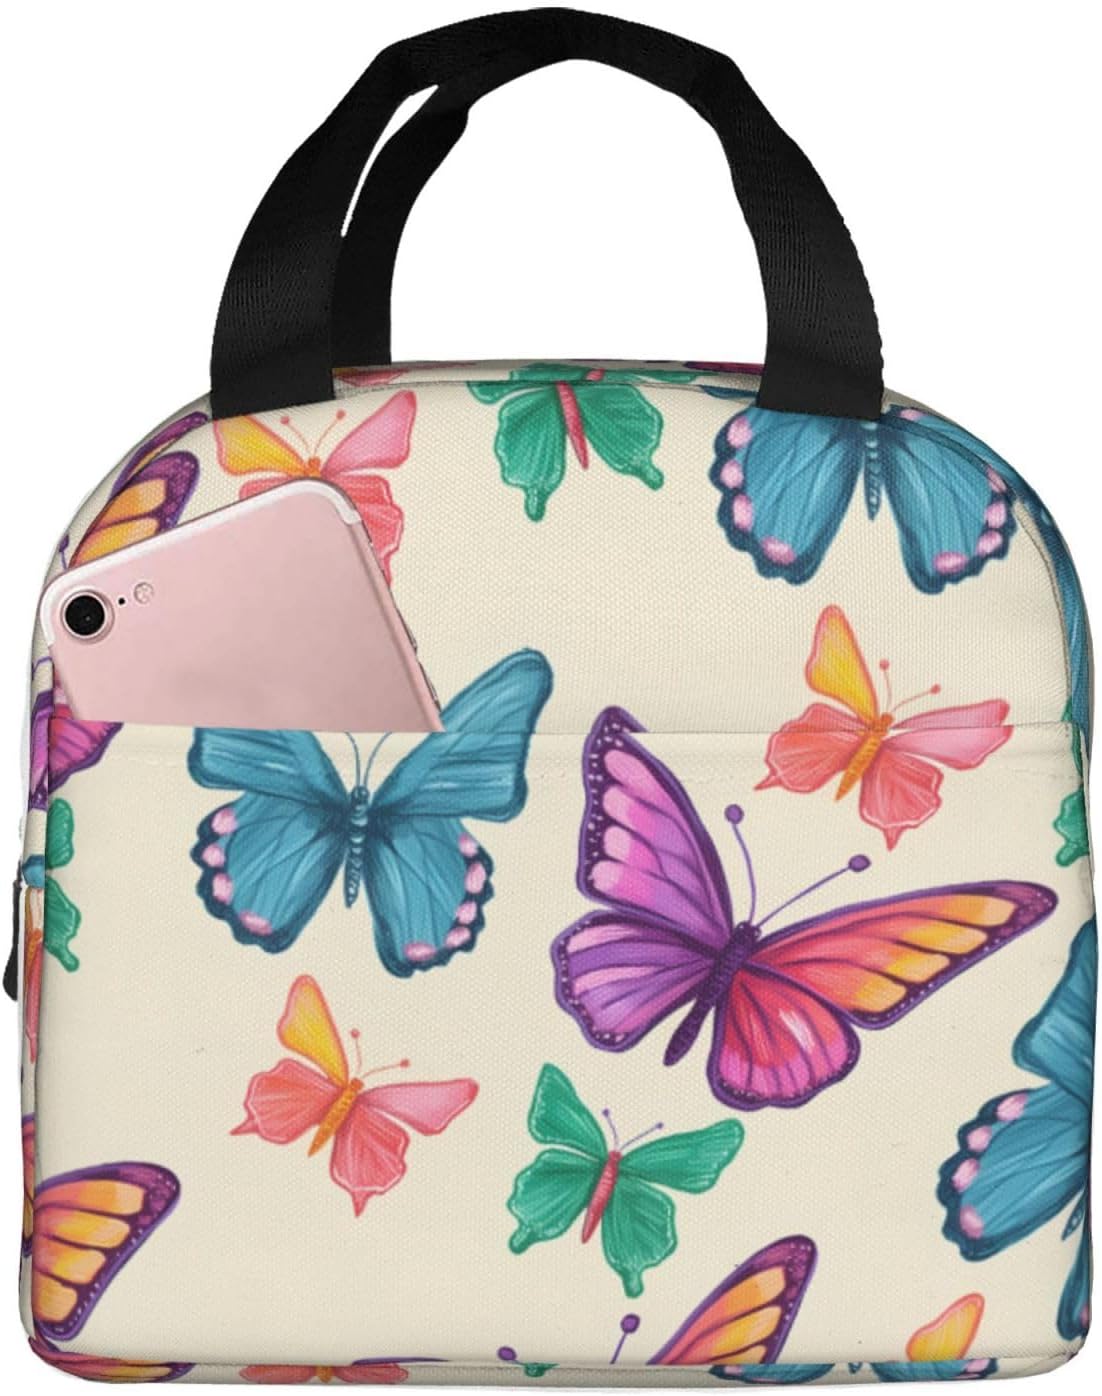 Baiyi Purple Butterfly Insulated Lunch Bag - Chic Practical, Lunch Box ...